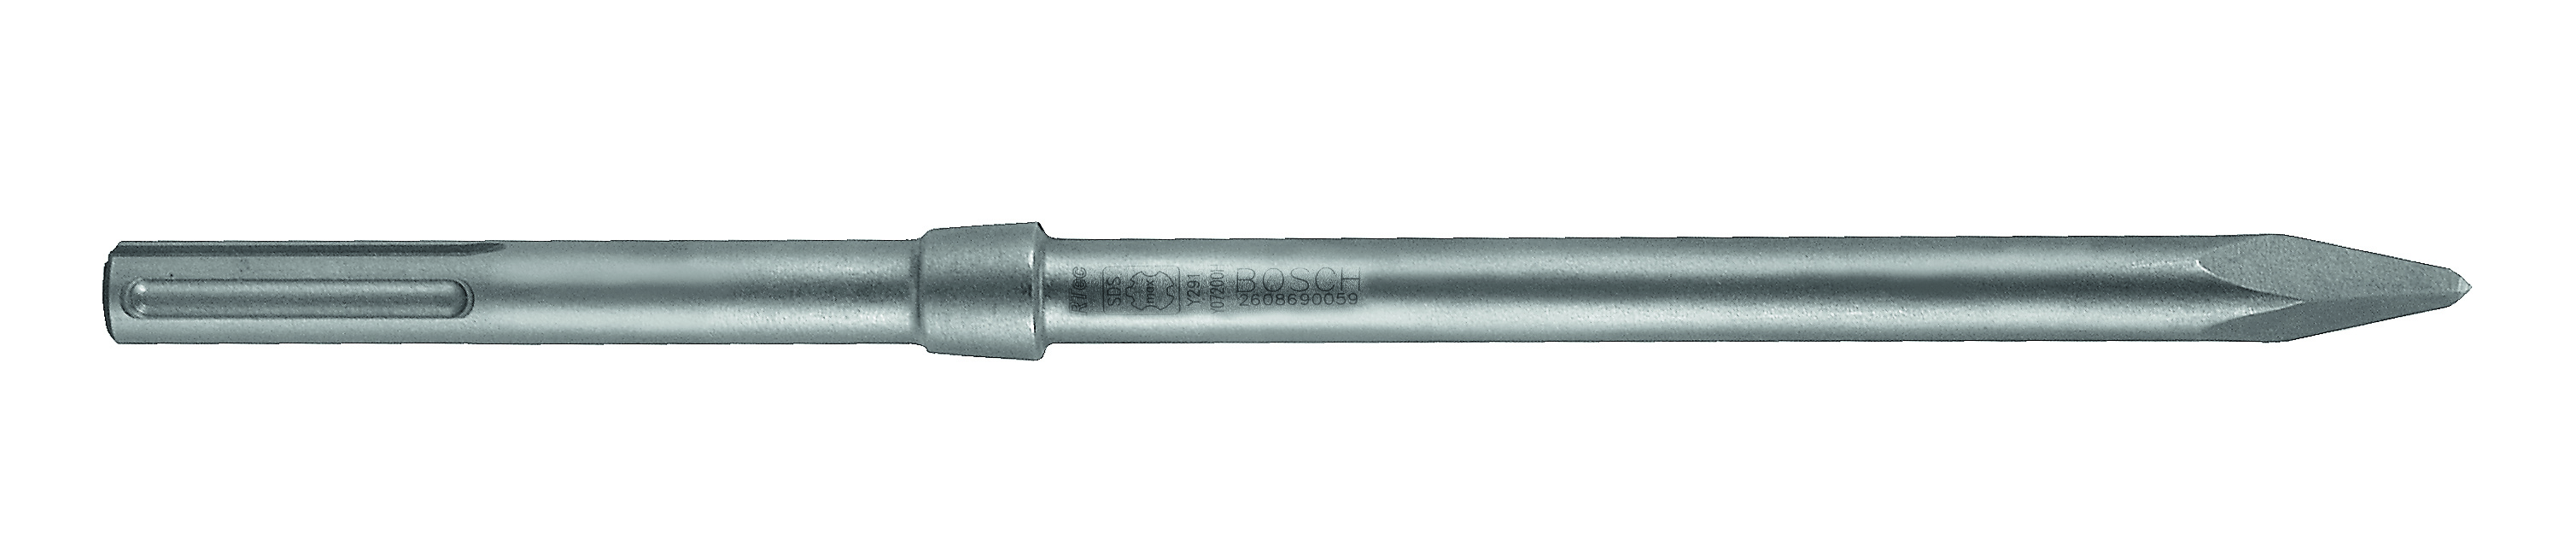 Bosch 300mm SDS-Max Point Chisel